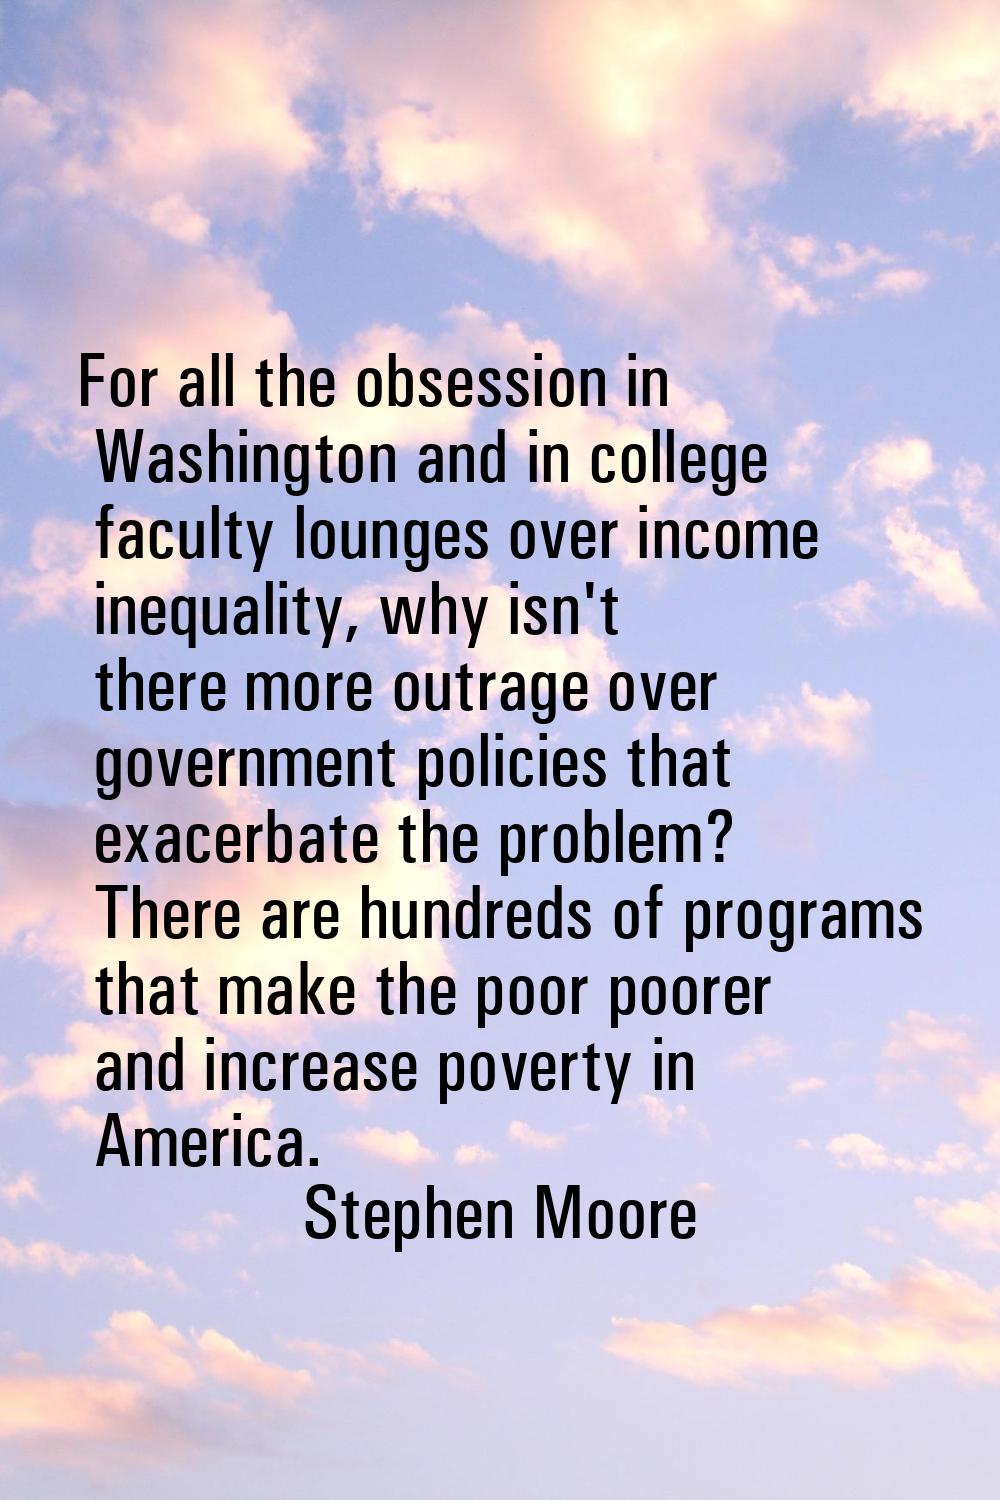 For all the obsession in Washington and in college faculty lounges over income inequality, why isn'